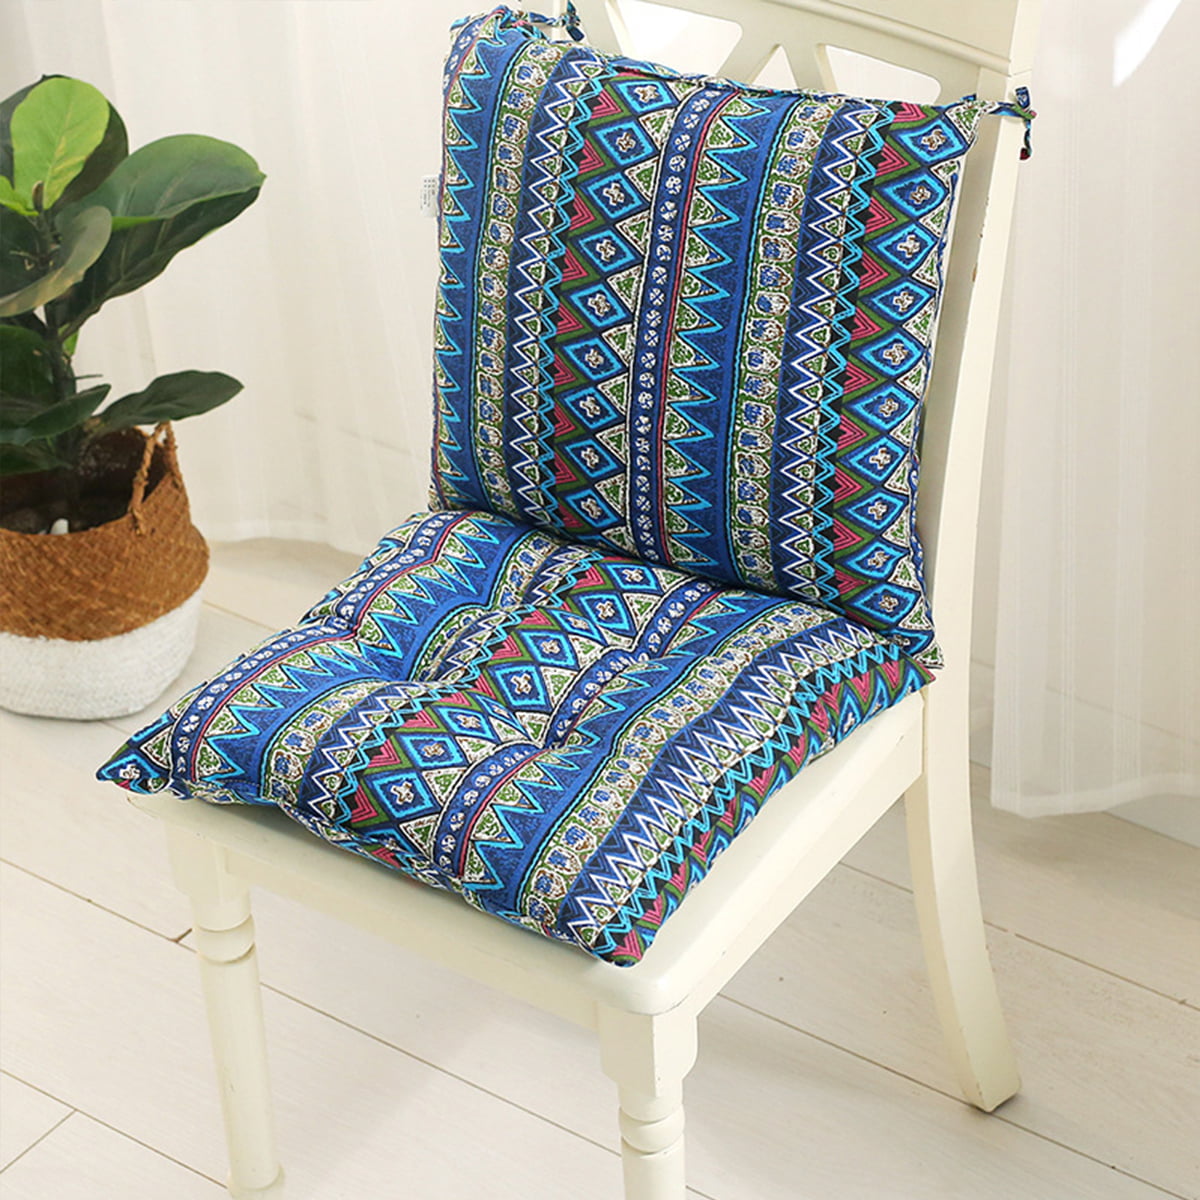 32 x 16 inch Chair Cushion ,Indoor Outdoor Dining Removable Chair Seat